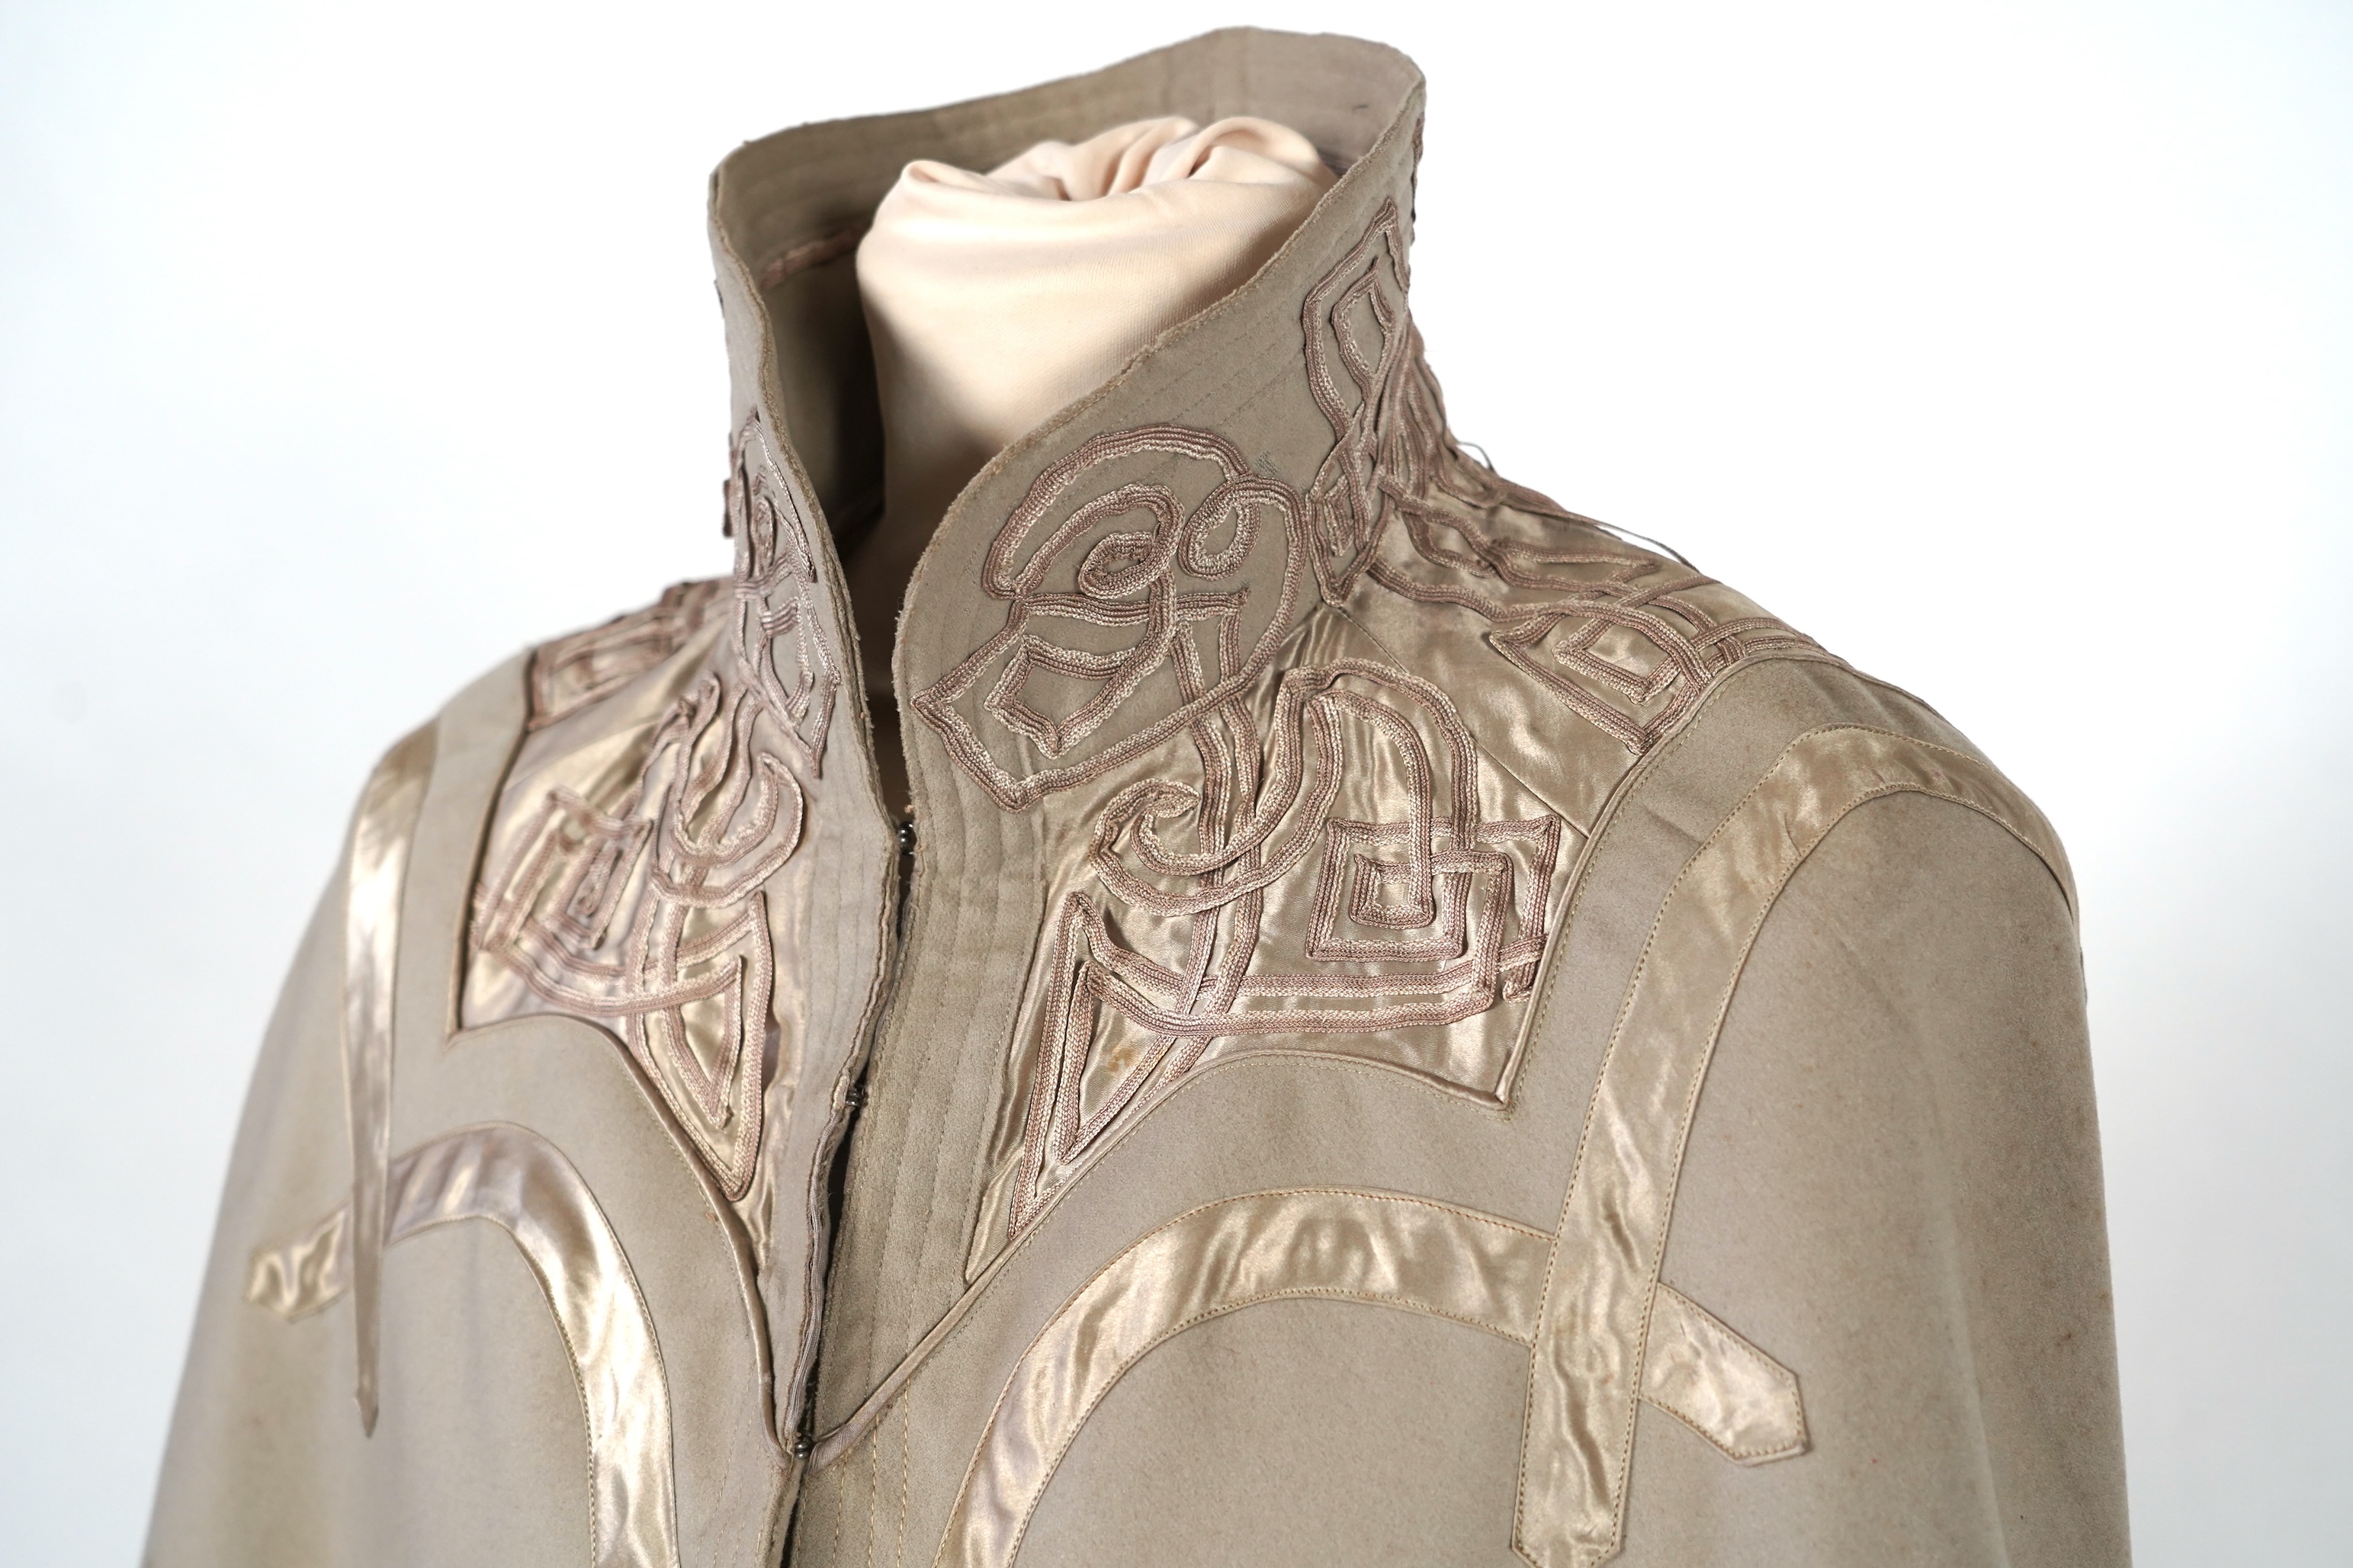 An Edwardian mushroom wool evening cape, decorated with silk ribbon worked strapping and ornate appliquéd fine braiding across the shoulders and under section of the collar, lined with cream silk satin.